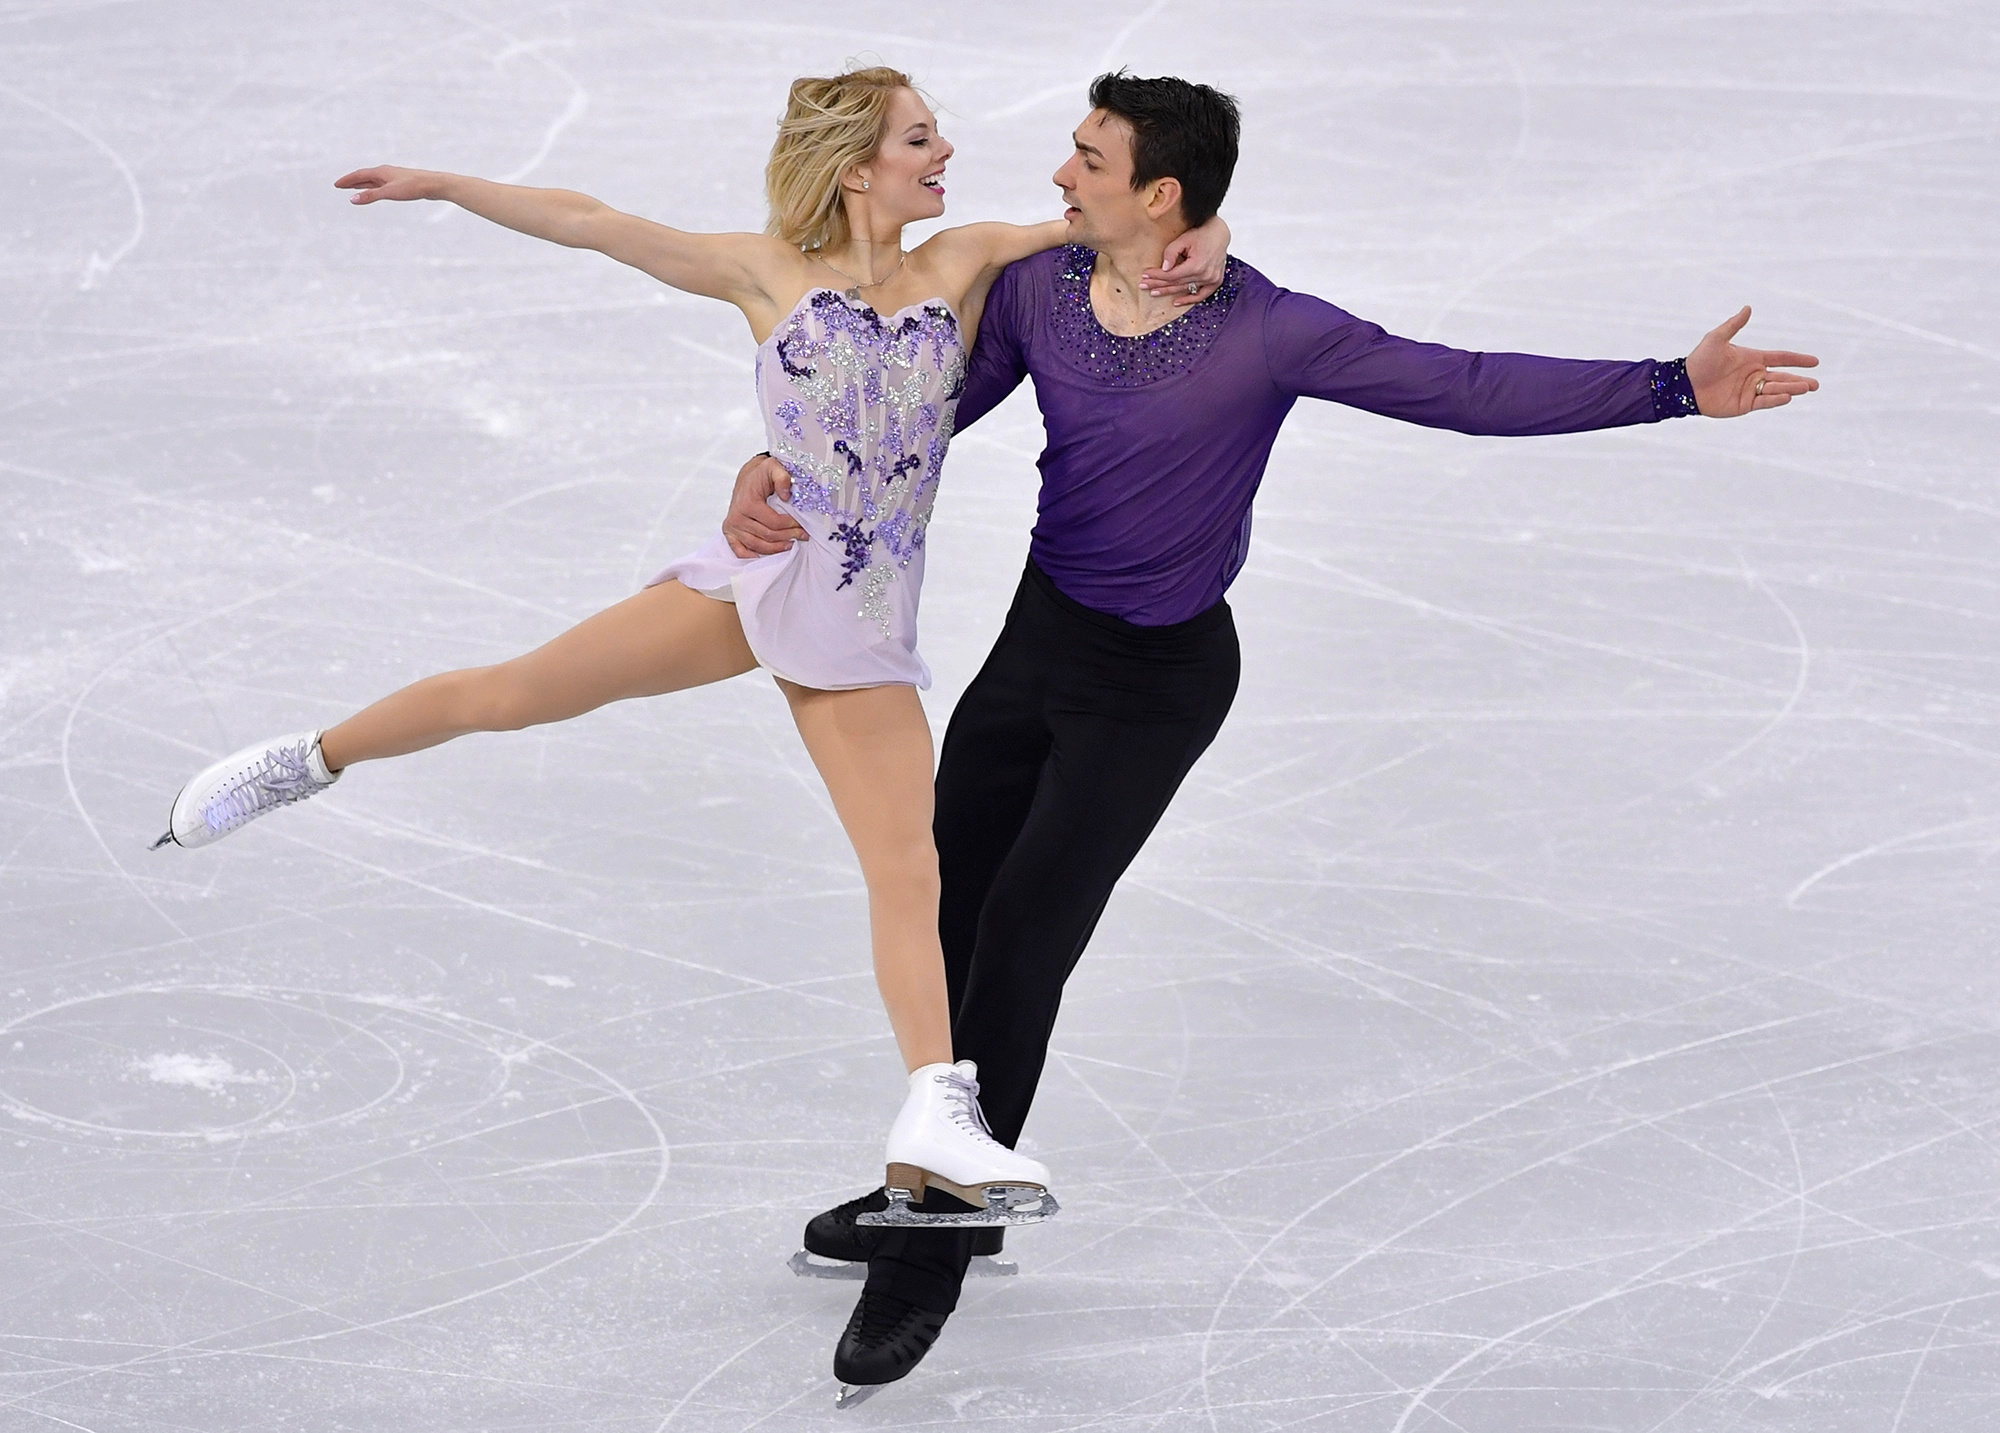 Pair Skating: Olympic pairs, Olivia Smart and Zachary Donohue, Figure skating couple. 2000x1440 HD Background.